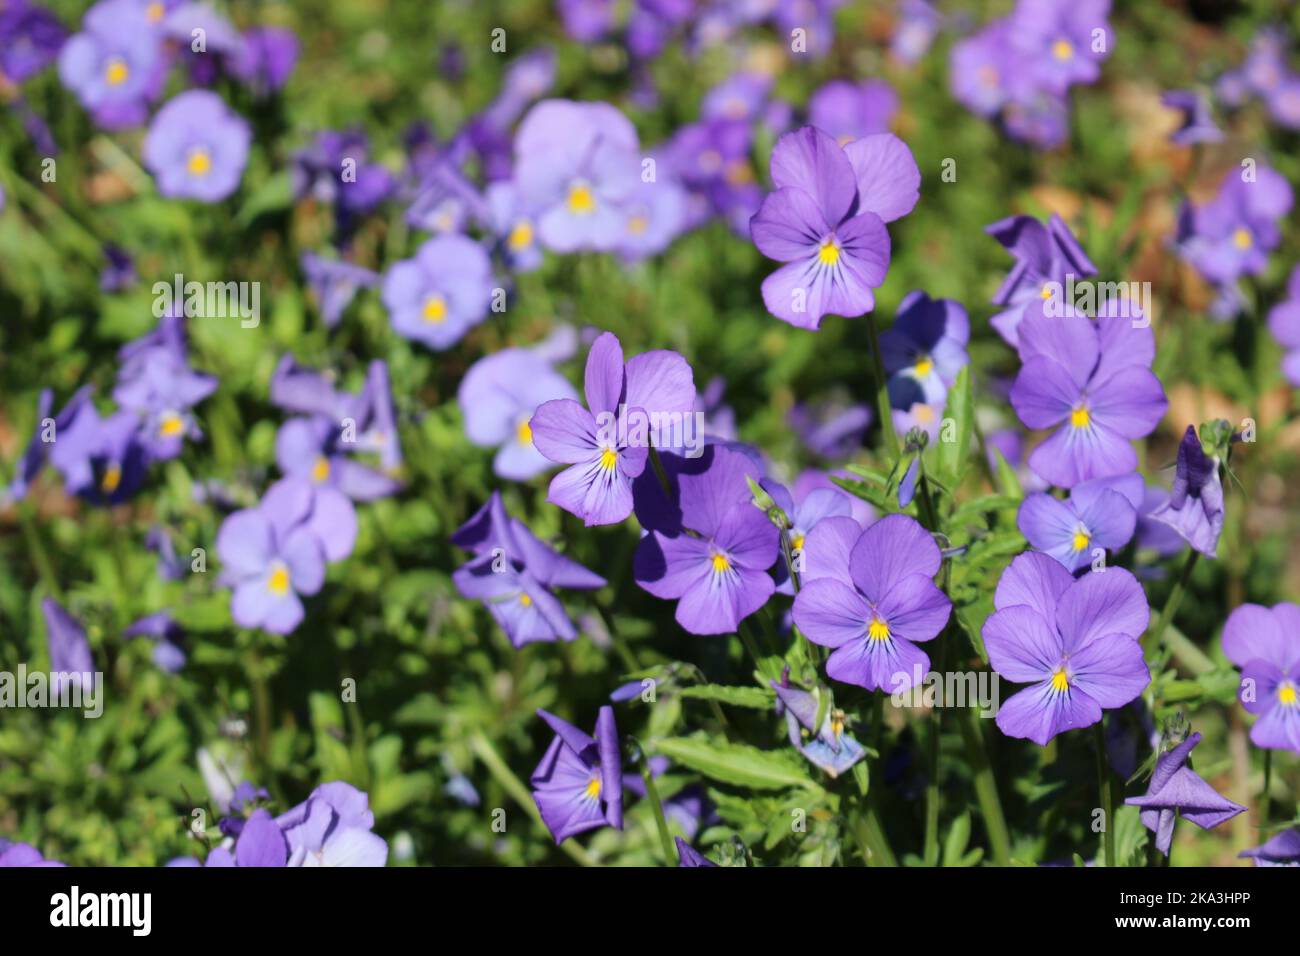 A closeup shot of blooming purple horned pansy flowers in blurred background Stock Photo